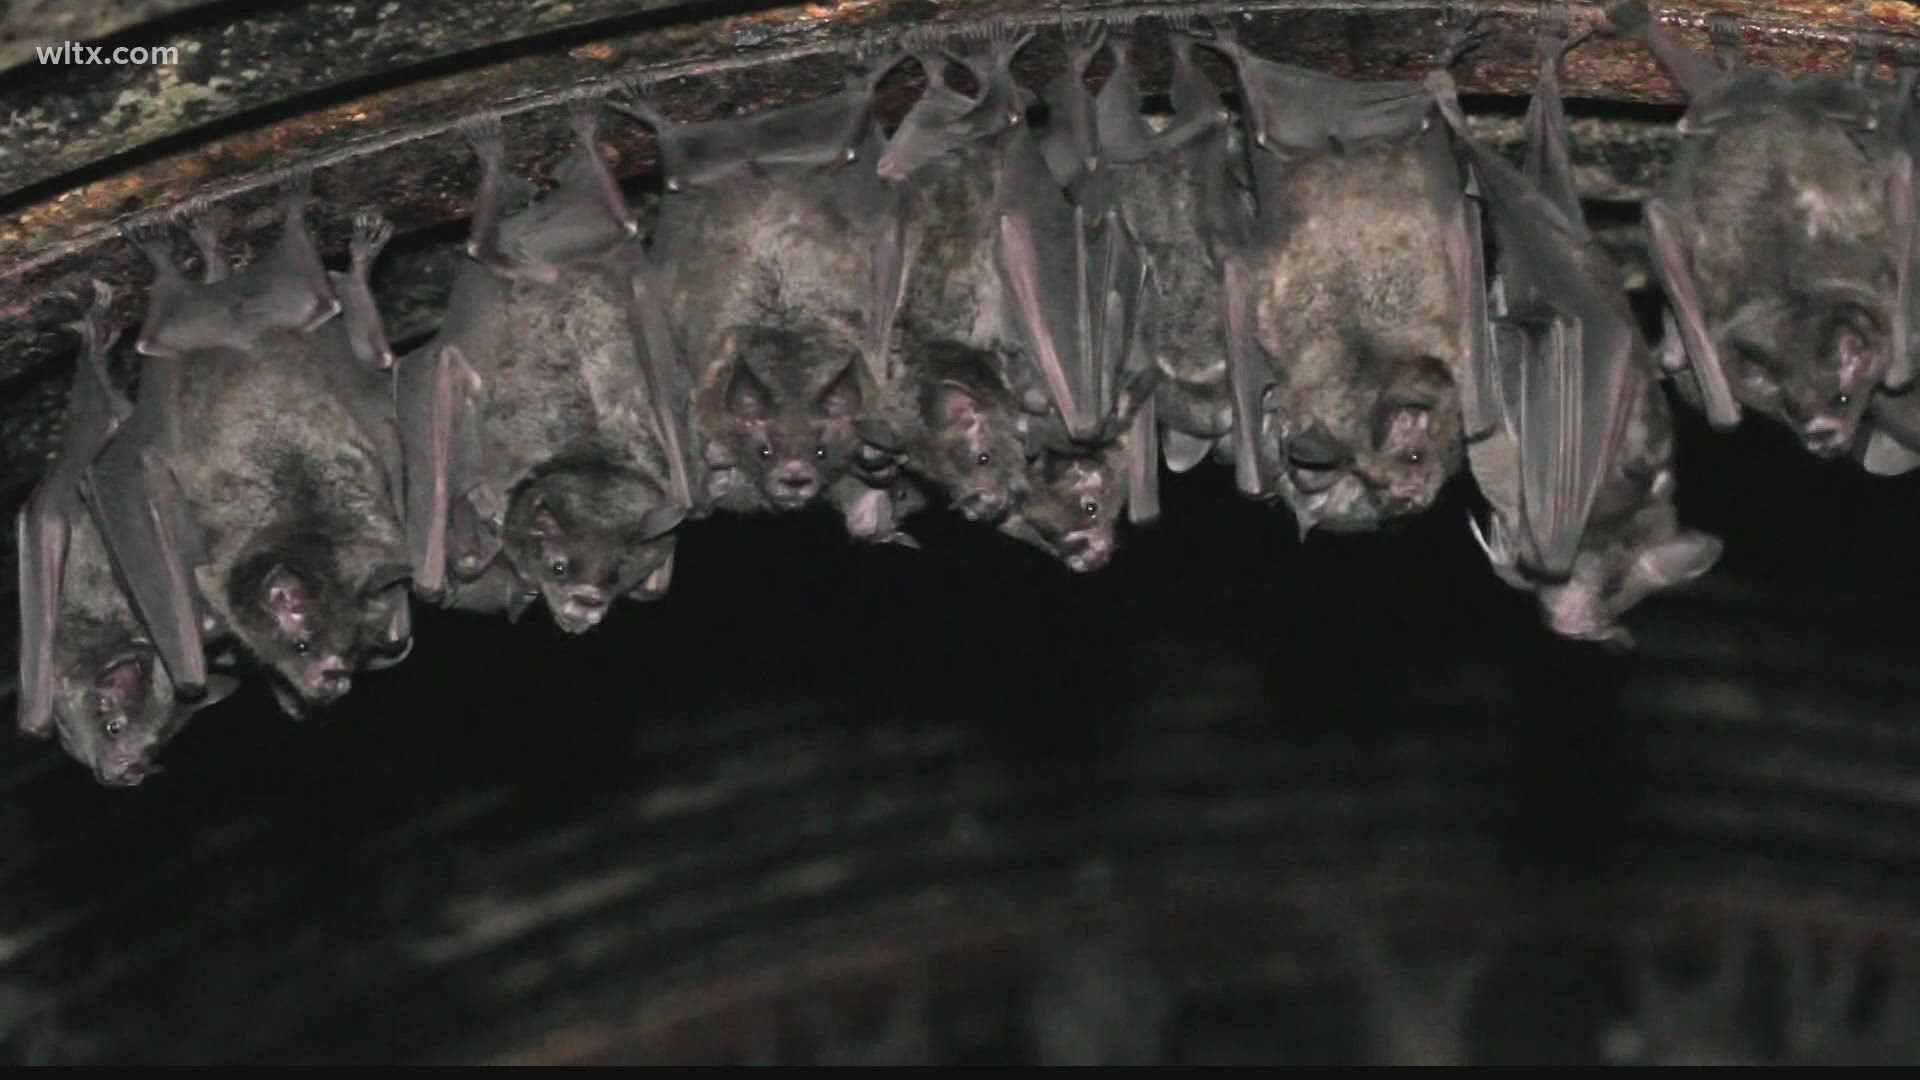 The pest removal company talks about why its not great to have bats nesting in your home.